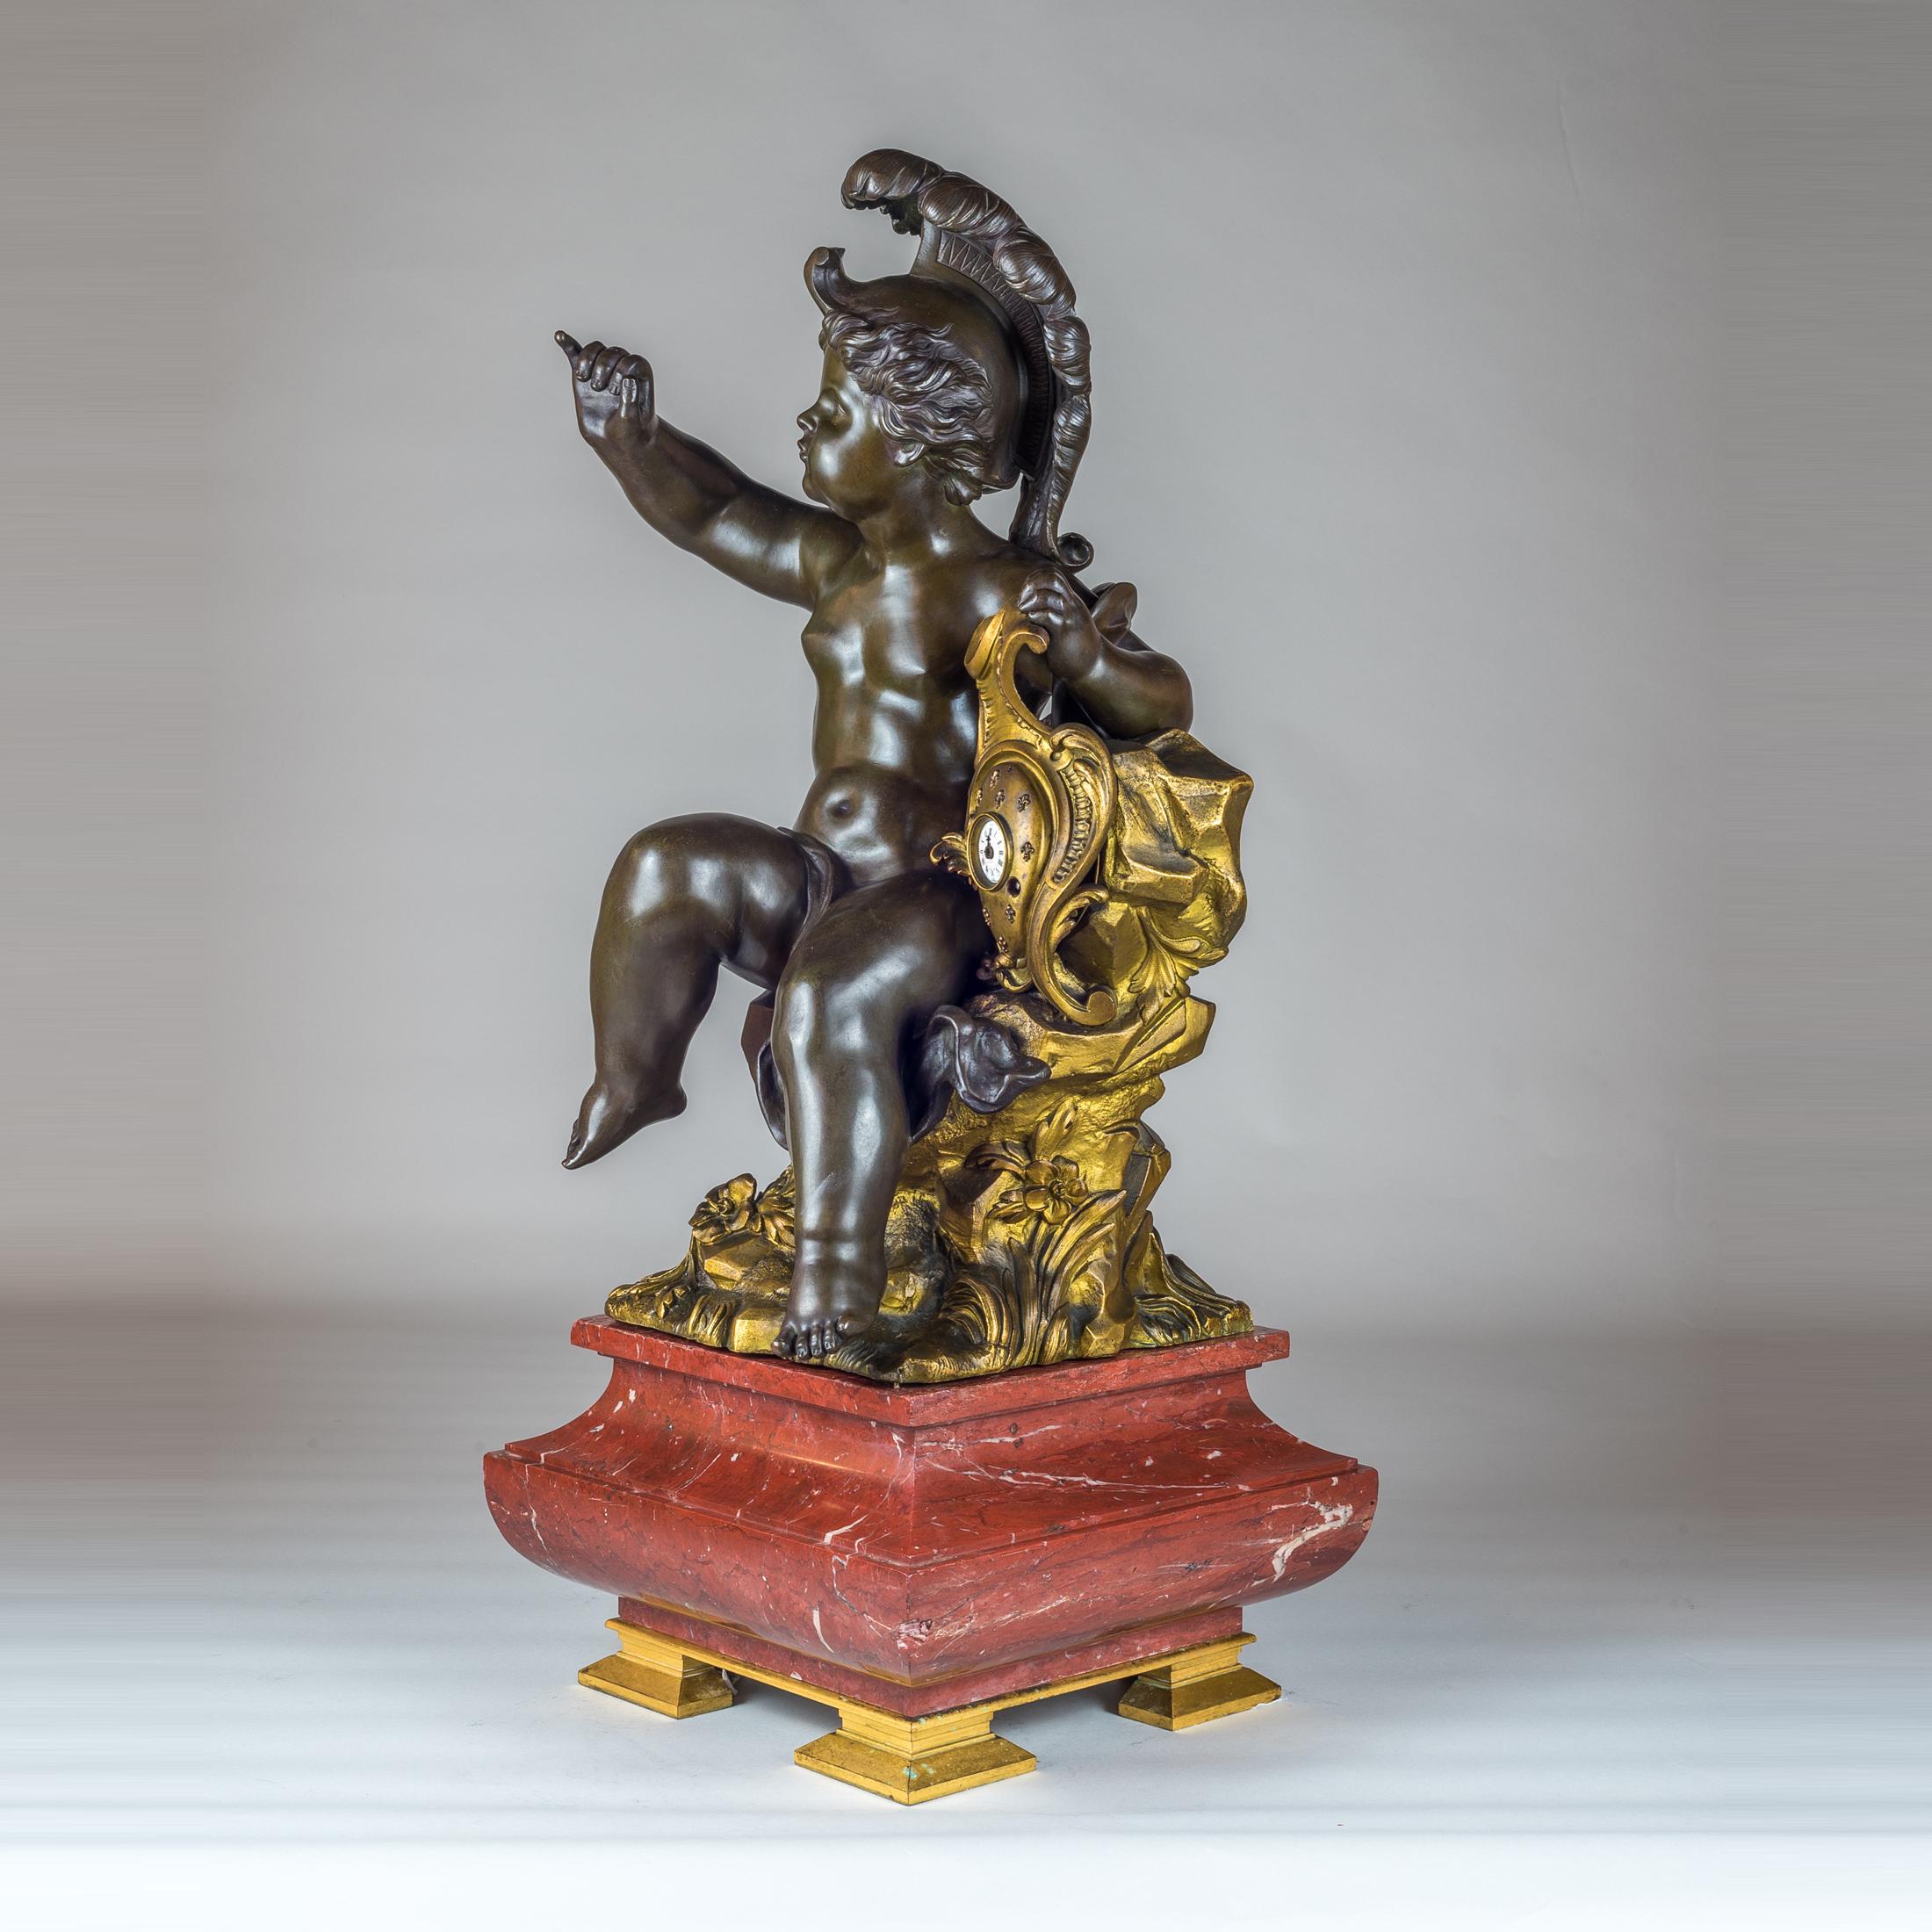 The fine casting classical seated cherub beside a Roman numeral dial, surmounted on Royal Rouge marble plinth. Movement marked RAINCO Fres Paris 2045/Jappy Freres & Cie. ?
Maker: Jappy Freres & Cie.?
Origin: French?
Date: 19th